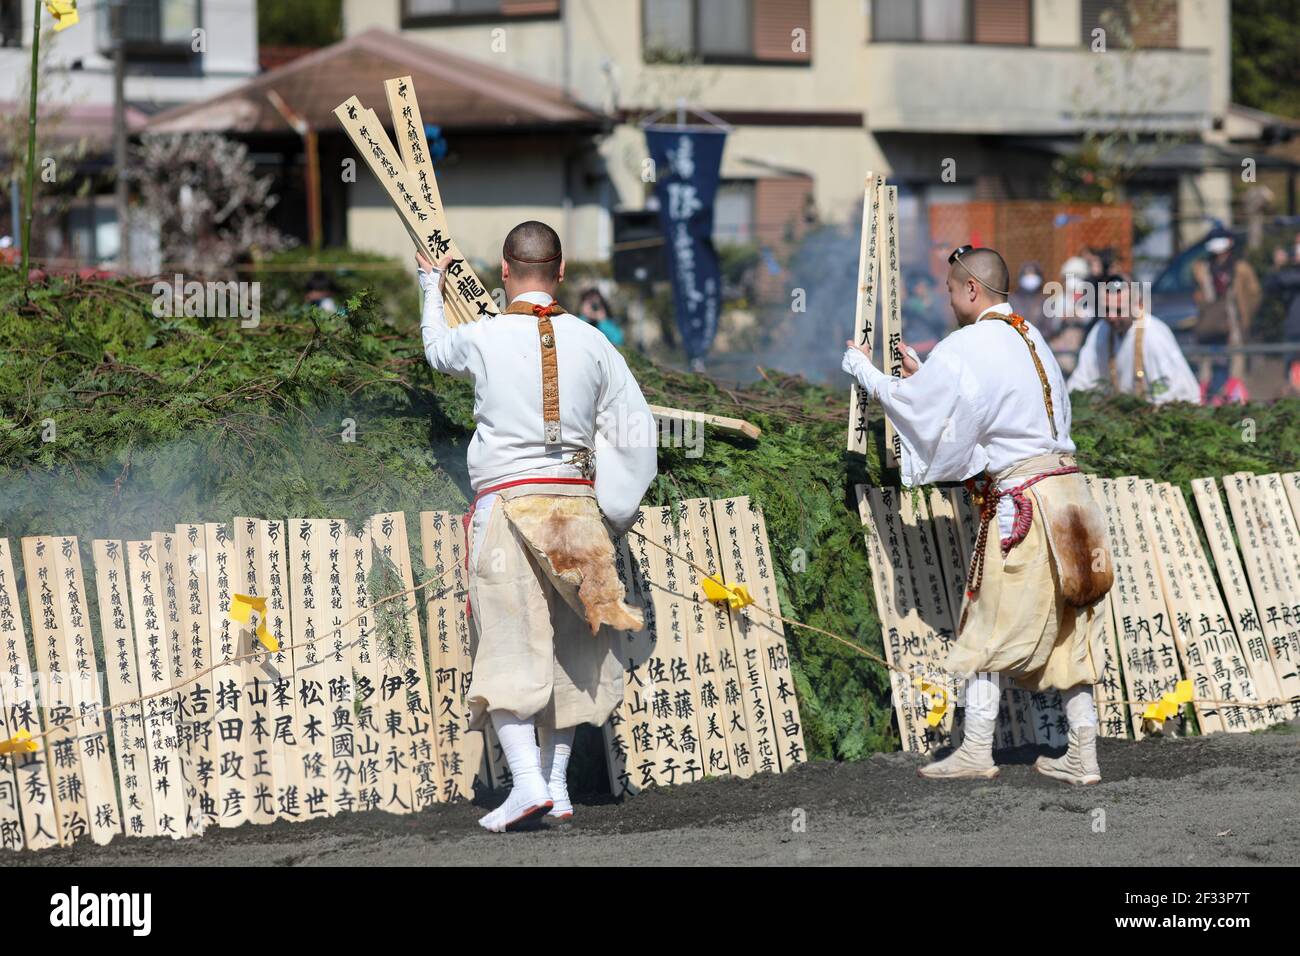 Hachioji, Japan. 14th Mar, 2021. Monks are seen preparing big bonfire.The Fire Walking Festival is held near Mount Takao every second Sunday of March. This year the programme of the Festival was shorter because of Covid19 pandemic, all people and some Monks were wearing face mask. The main attraction of Festival is the Monks walk barefoot across the embers of burning wood to cleanse themselves of evil spirits, pray for world peace, longevity, safe passage in life and general health and safety. (Photo by Takimoto Marina/SOPA Images/Sipa USA) Credit: Sipa USA/Alamy Live News Stock Photo